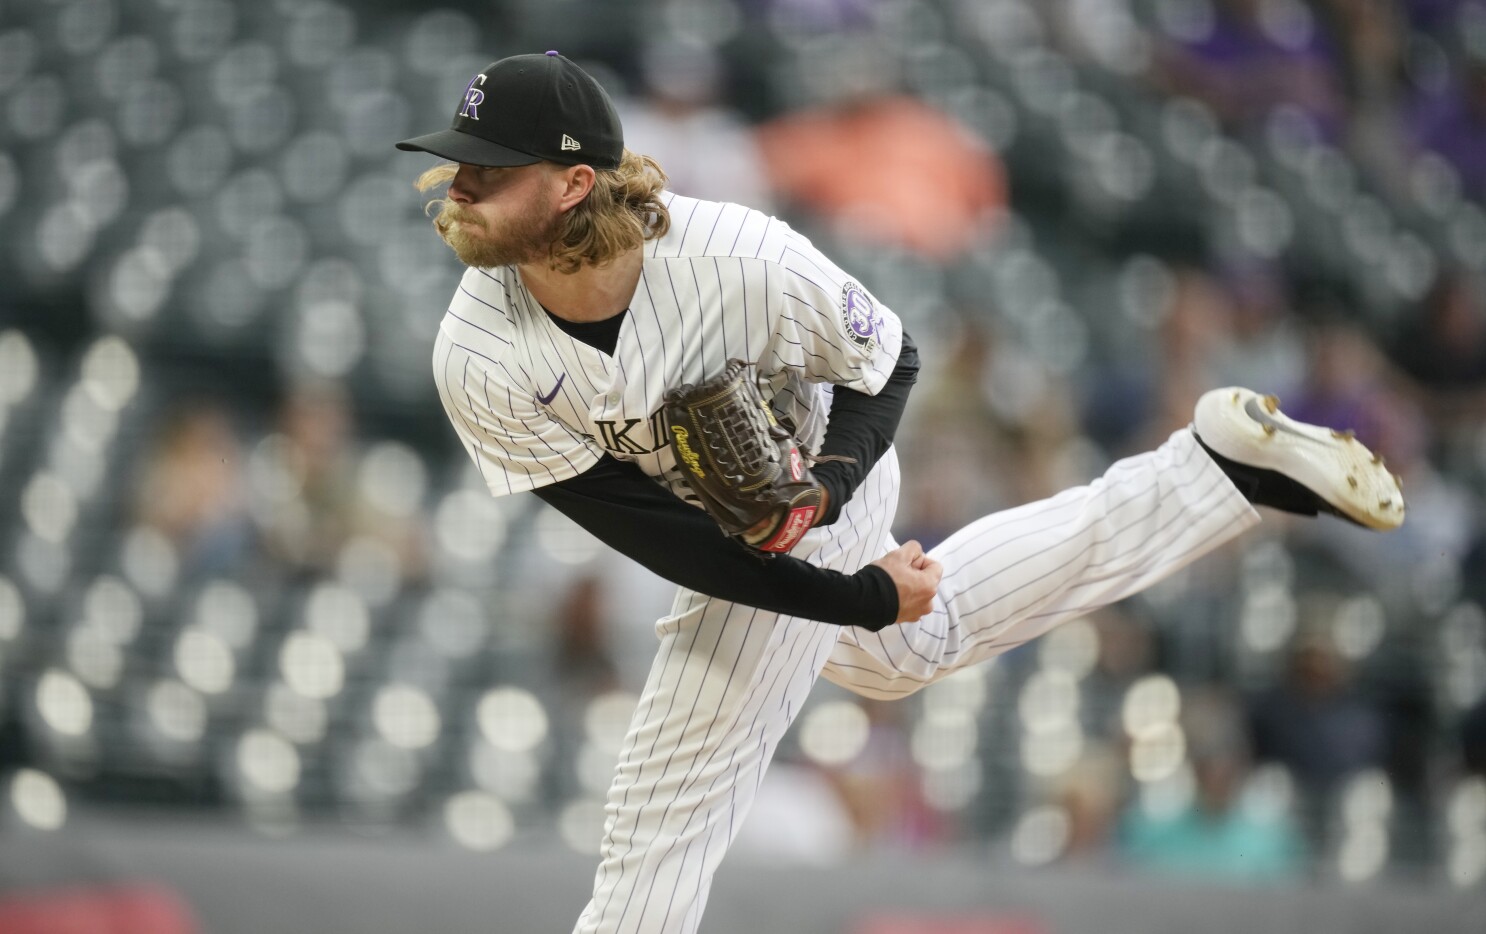 Top 5 players to play for the Colorado Rockies and Atlanta Braves